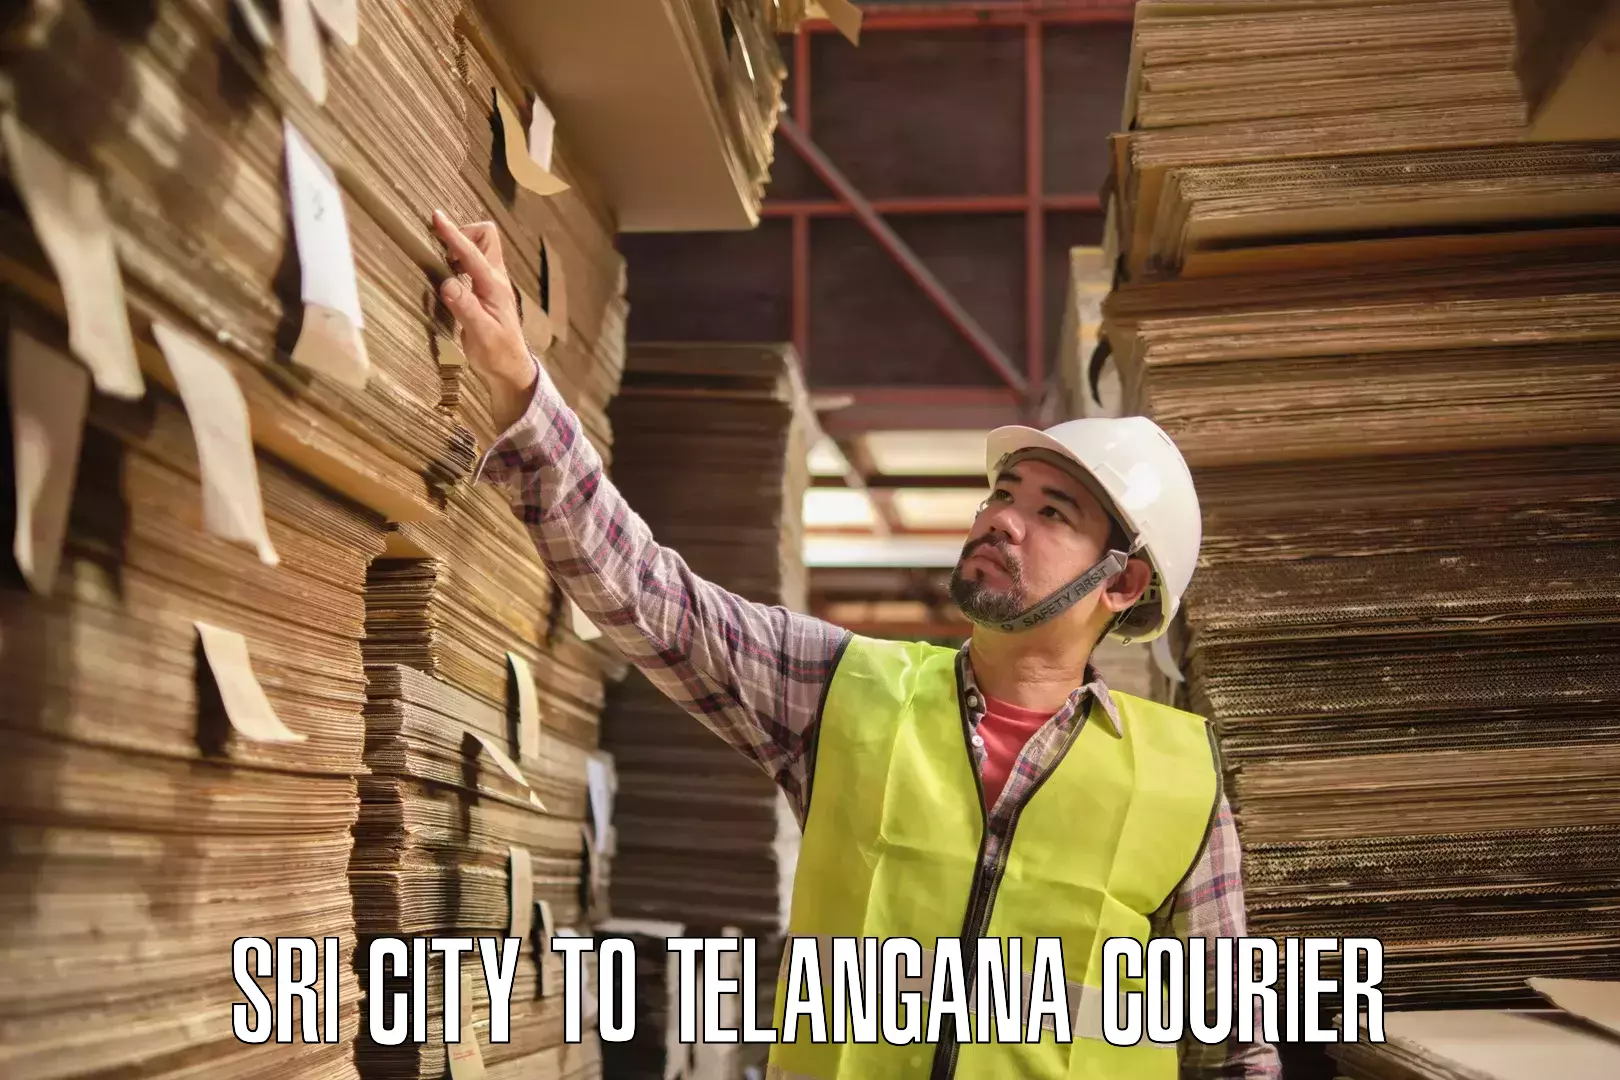 On-demand delivery Sri City to Telangana